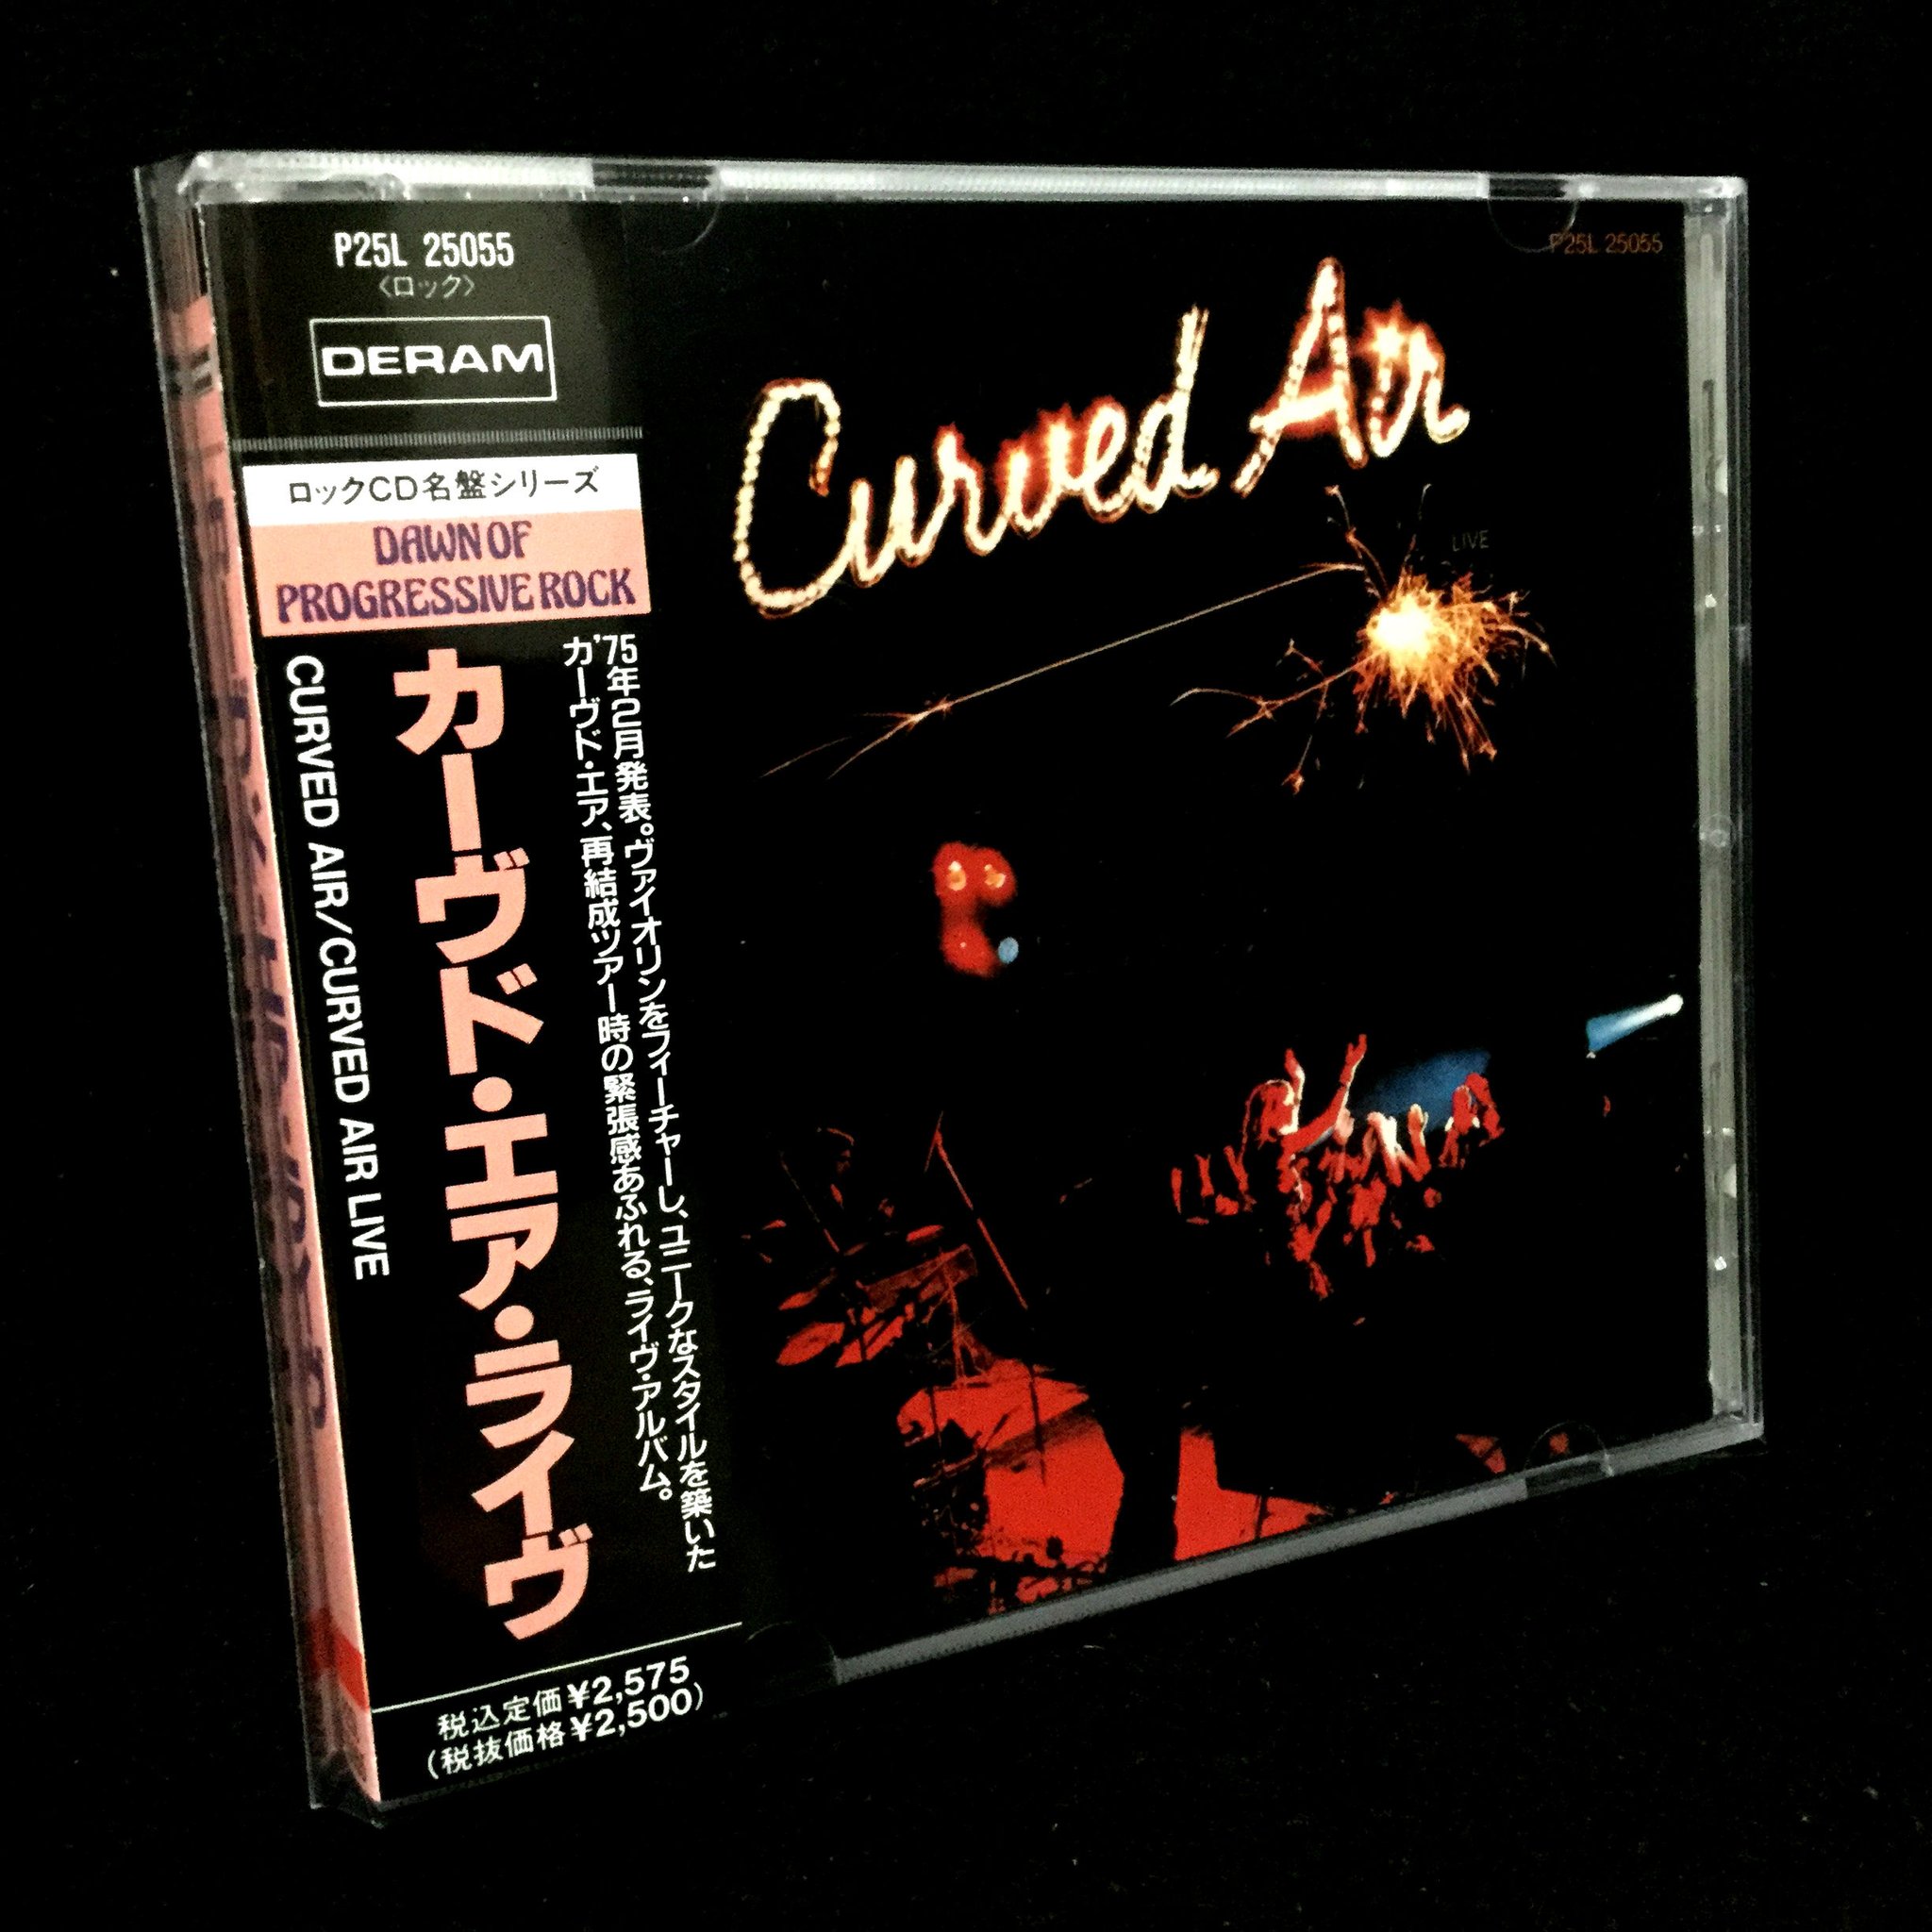 Youcharist 45th Anniversary Curved Air Live Recorded 4 December 1974 February 1975 Wiki 1975 Discogs Curvedair Curvedairlive Sonjakristina Darrylway Francismonkman Florianpilkingtonmiksa